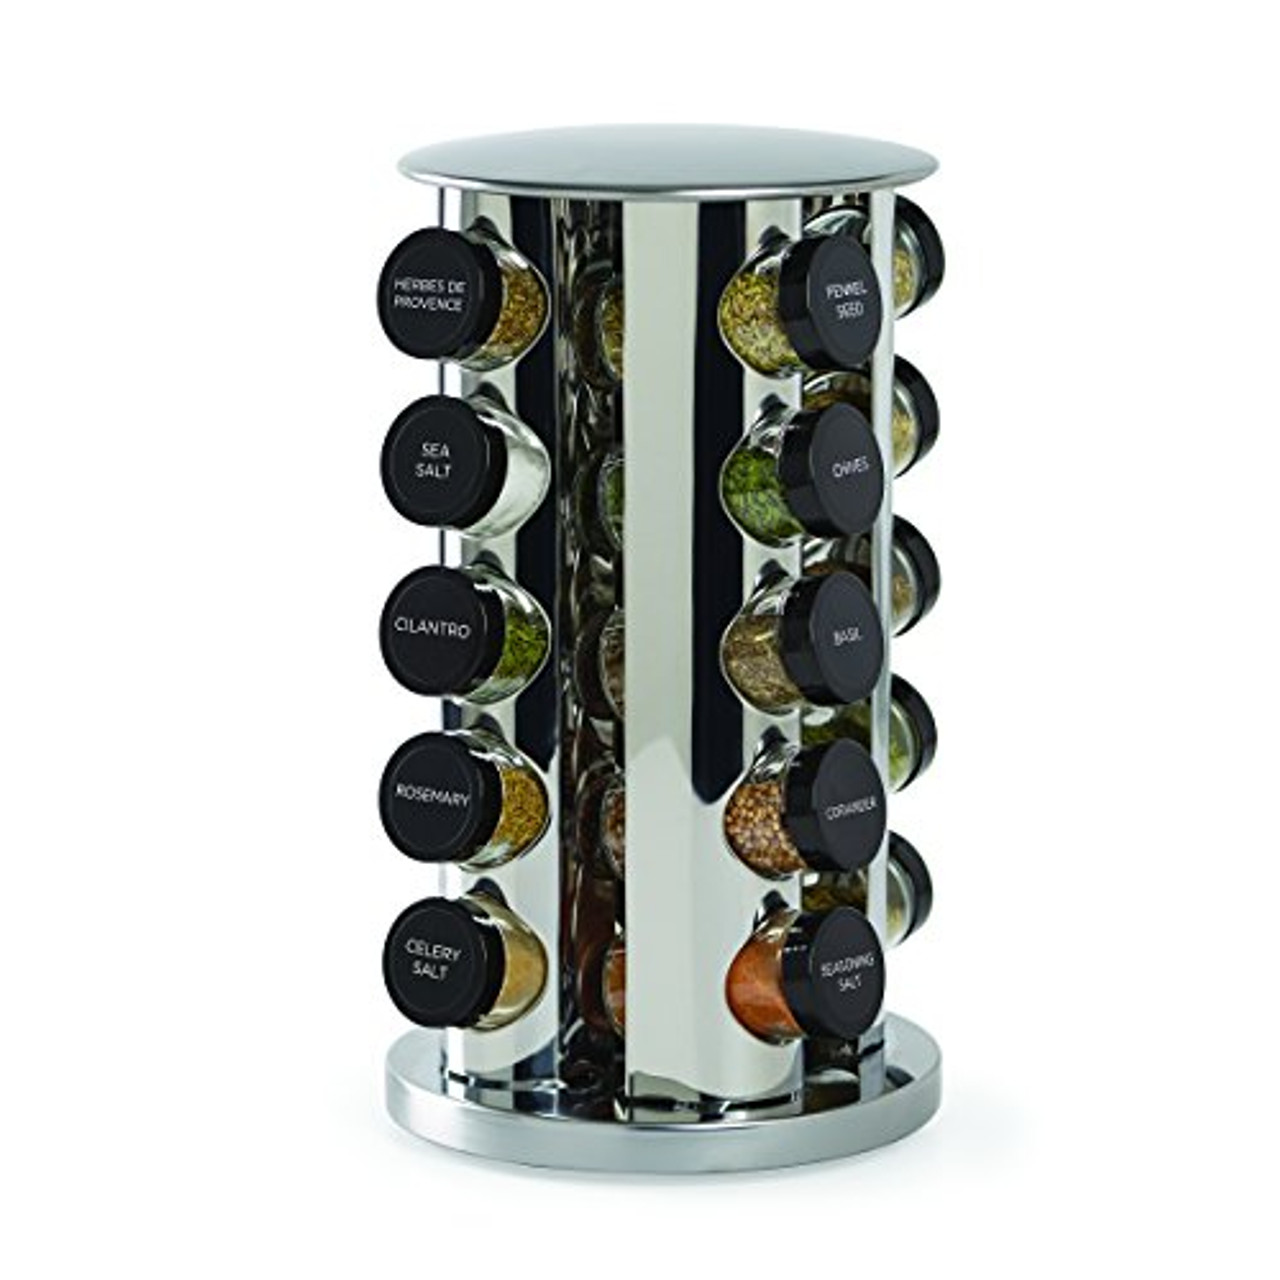 Kamenstein 16 Jar Ellington Revolving Countertop Spice Rack with Lift &  Pour Caps and Spices Included, FREE Spice Refills for 5 Years: Black and